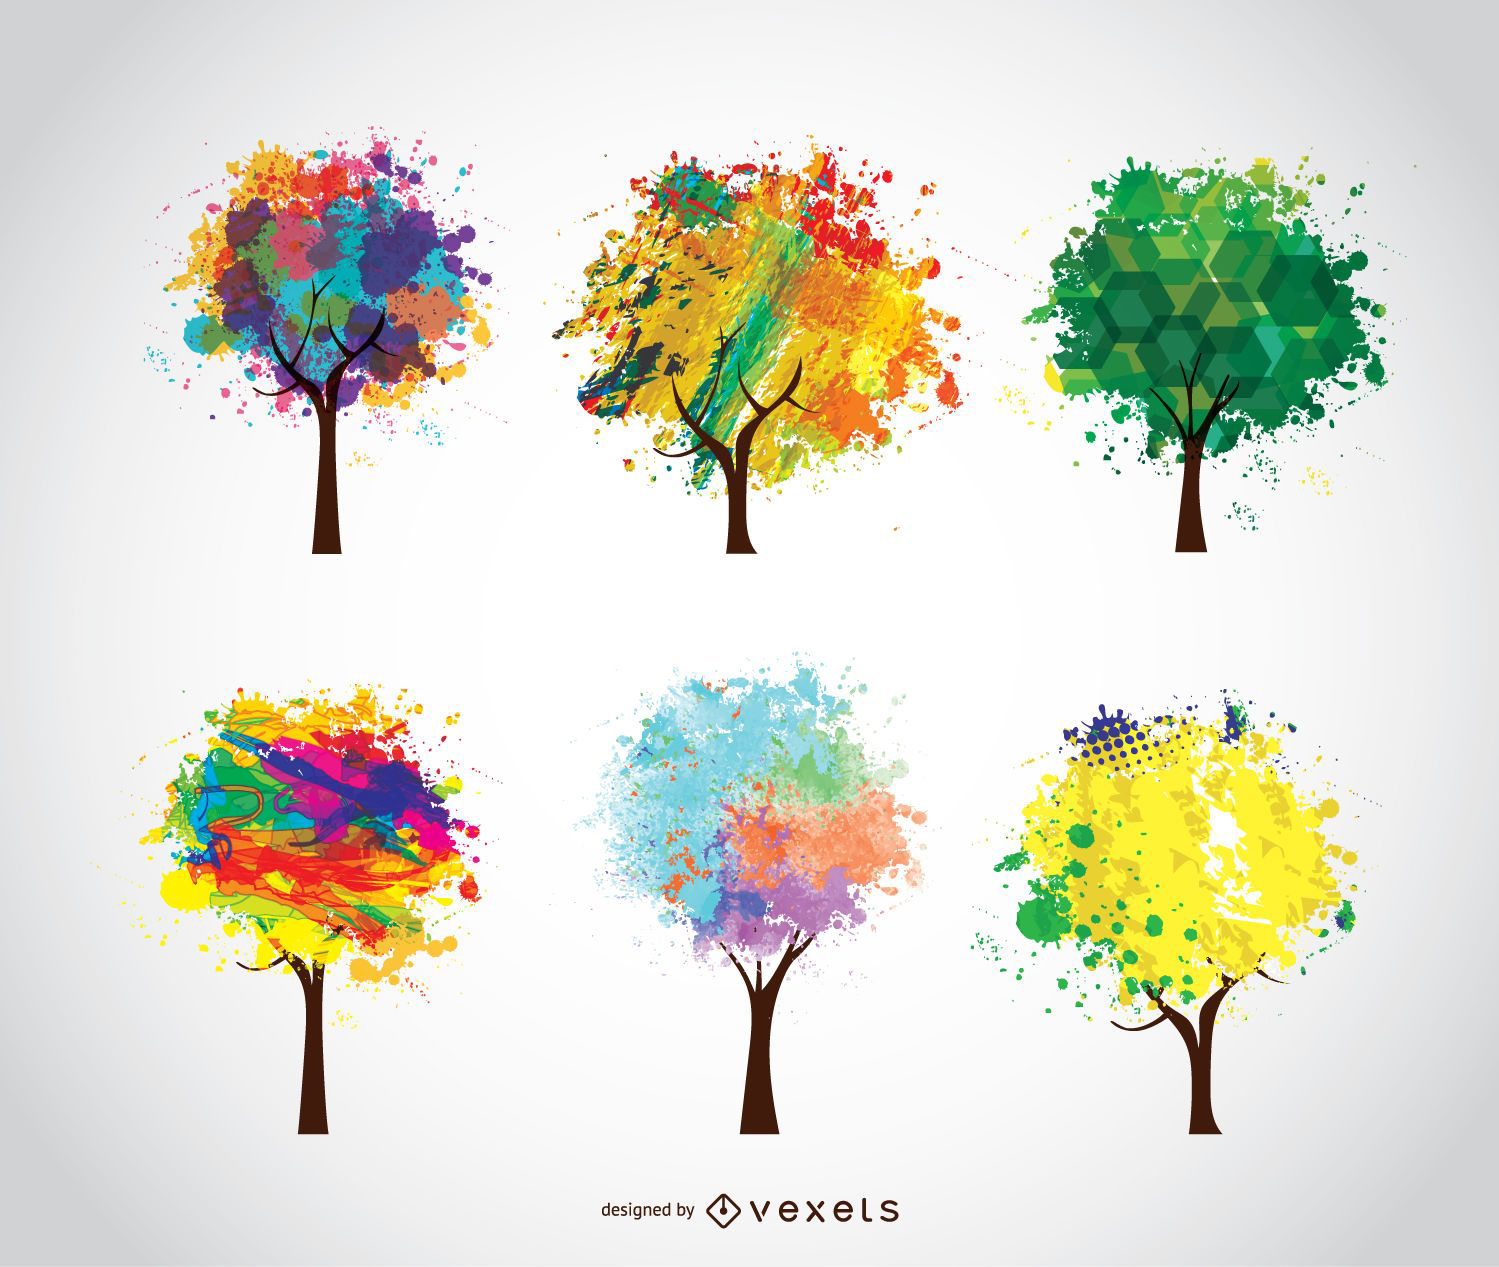 6 colorful artistic trees - Vector download